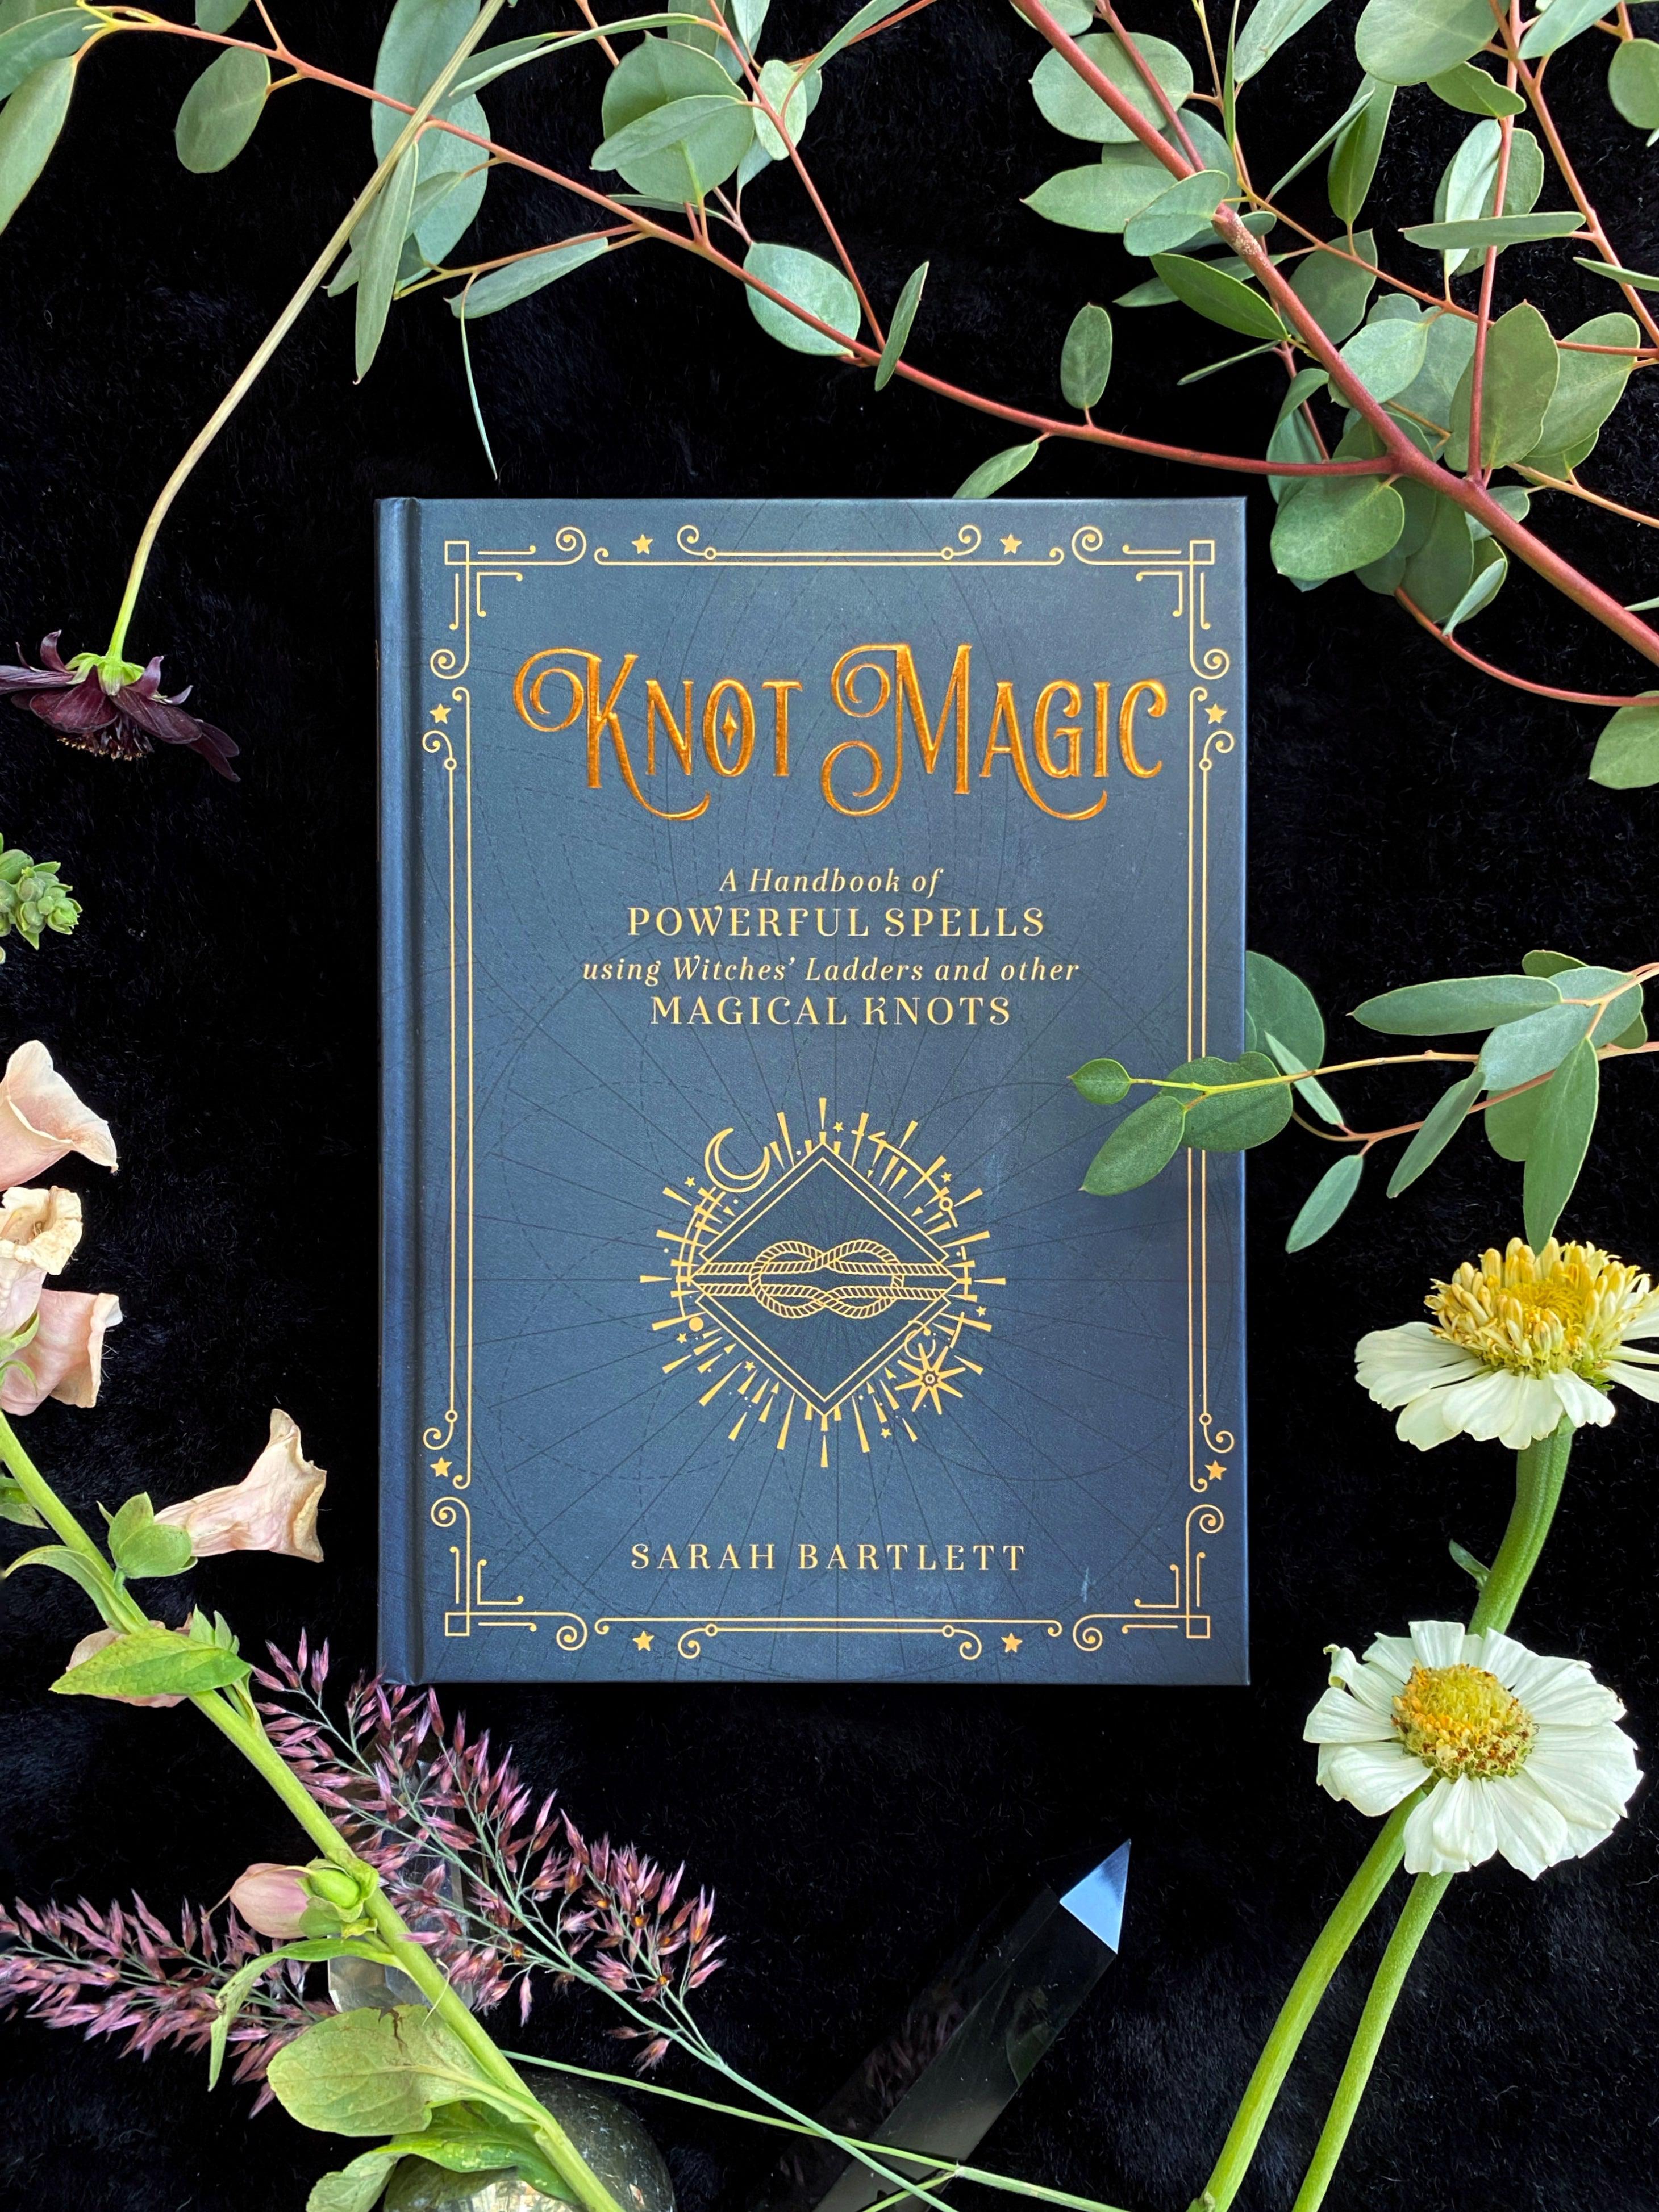 Knot Magic: A Handbook of Powerful Spells Using Witches' Ladders and other Magical Knots - Keven Craft Rituals